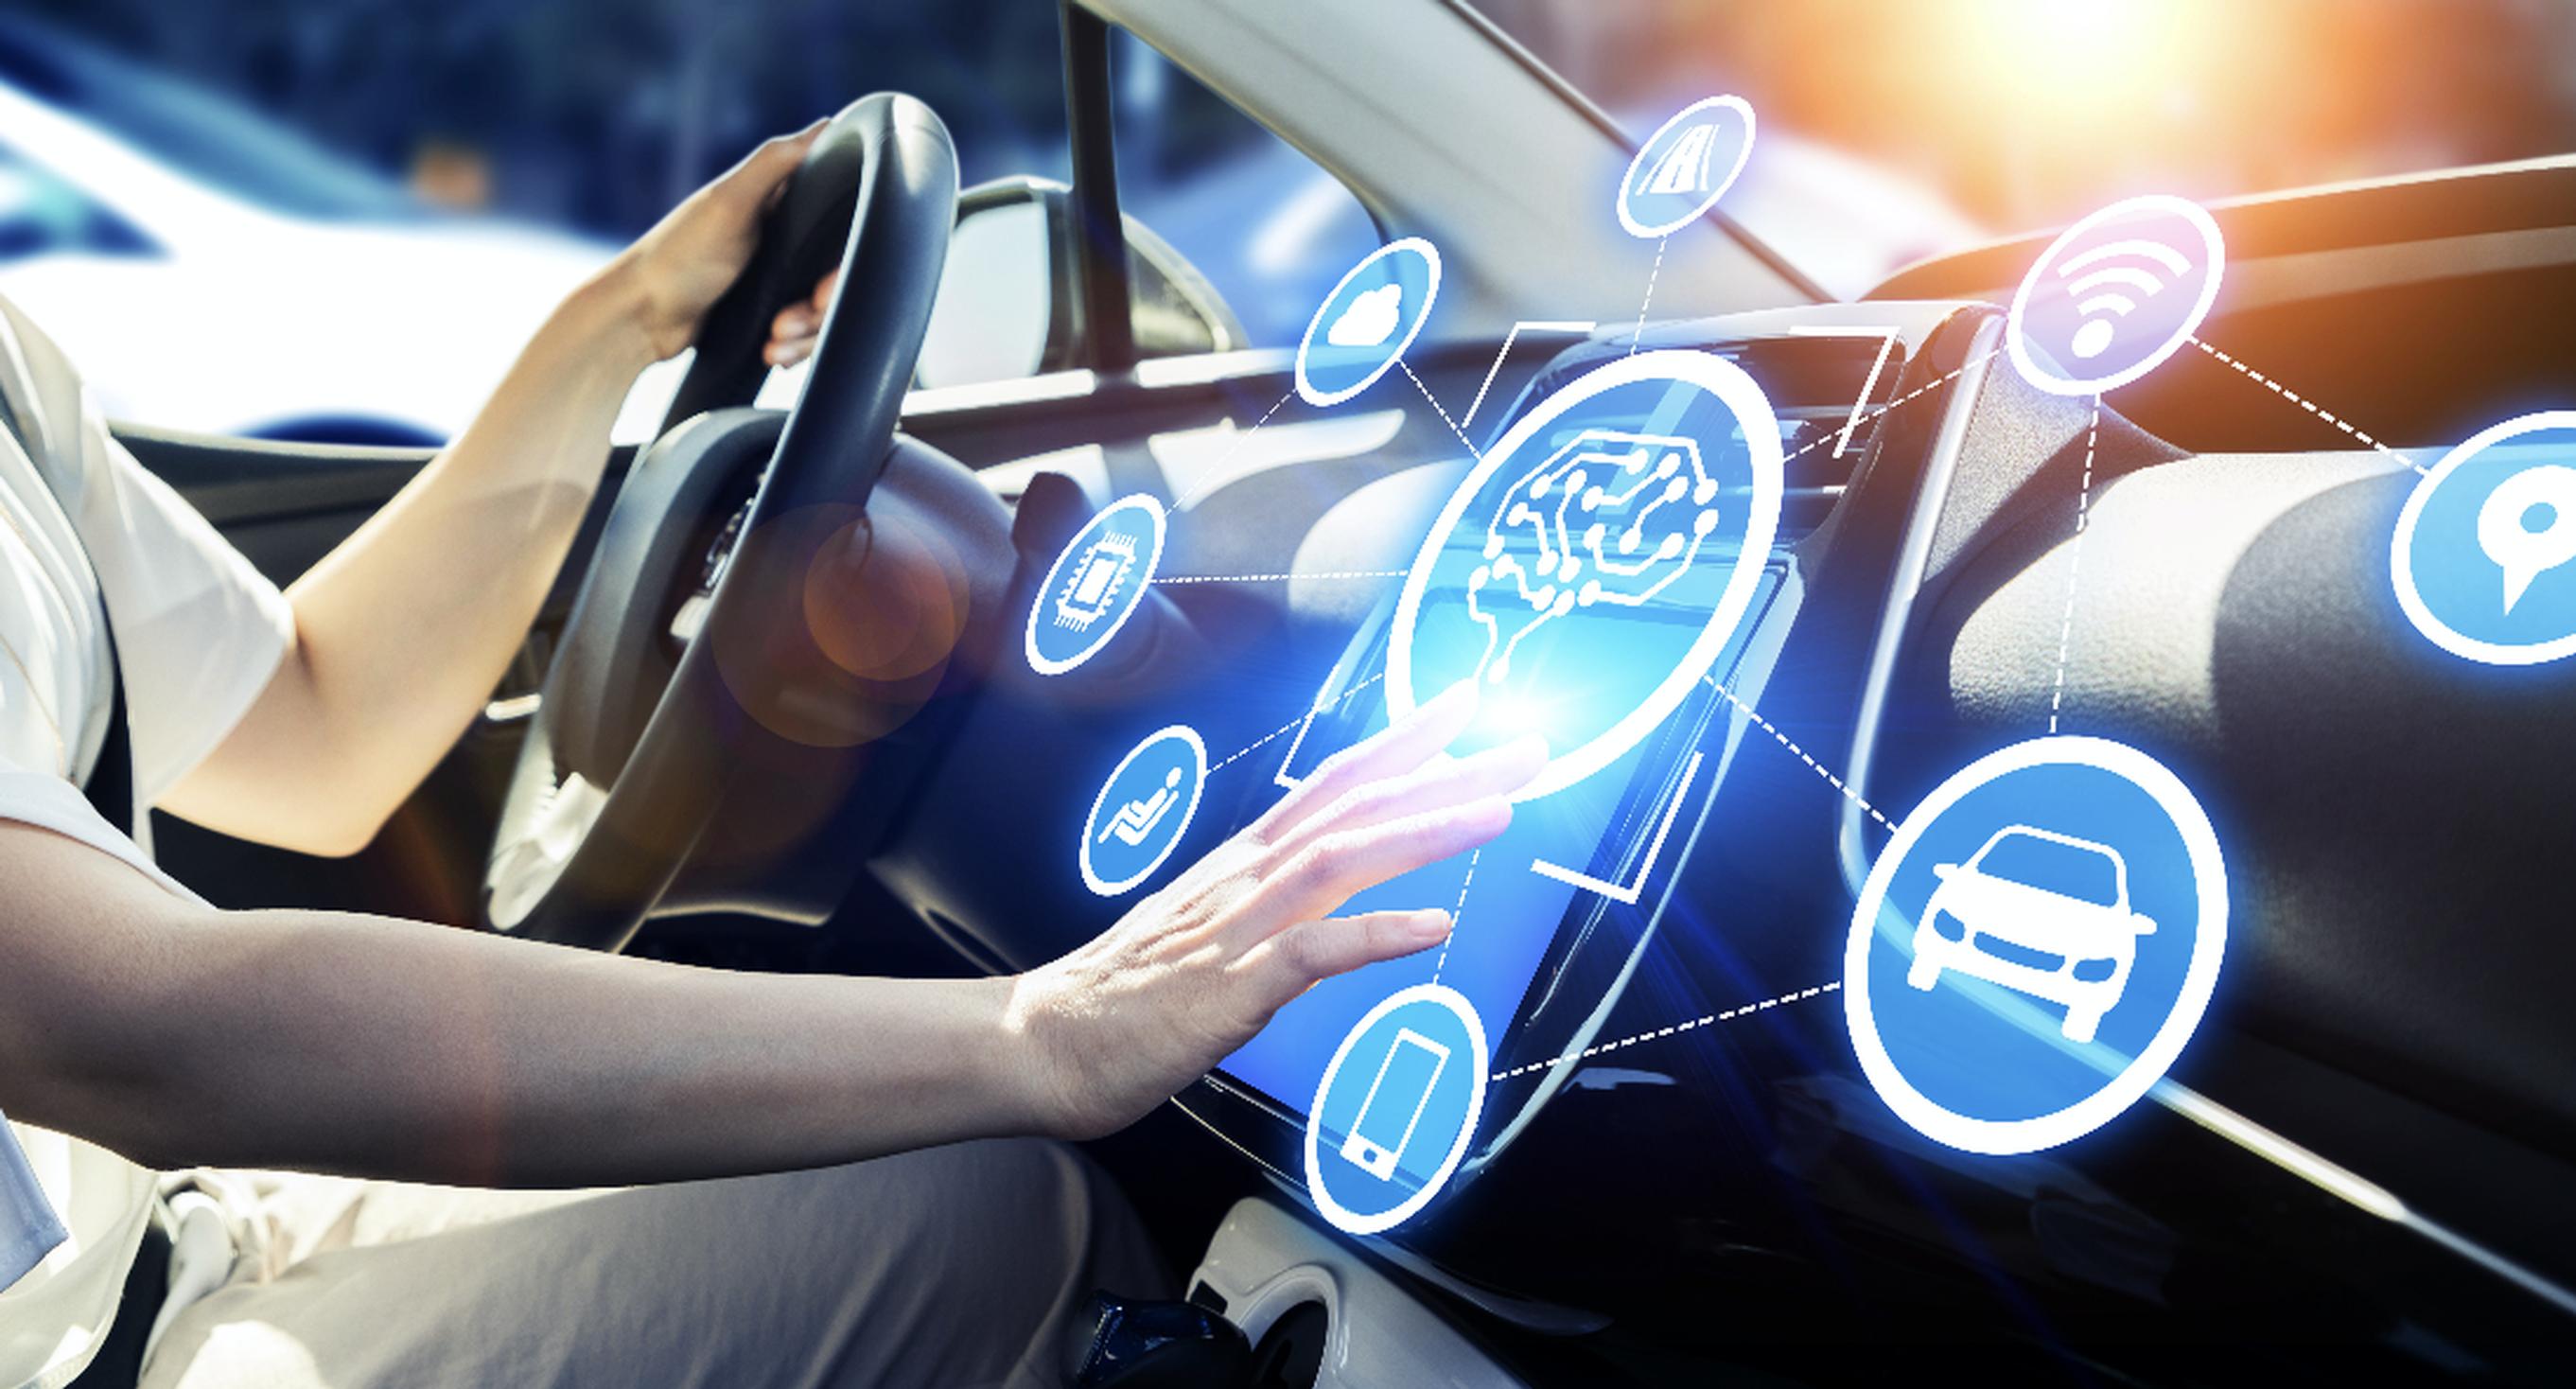 Transparency is the key to building trust in connected vehicles